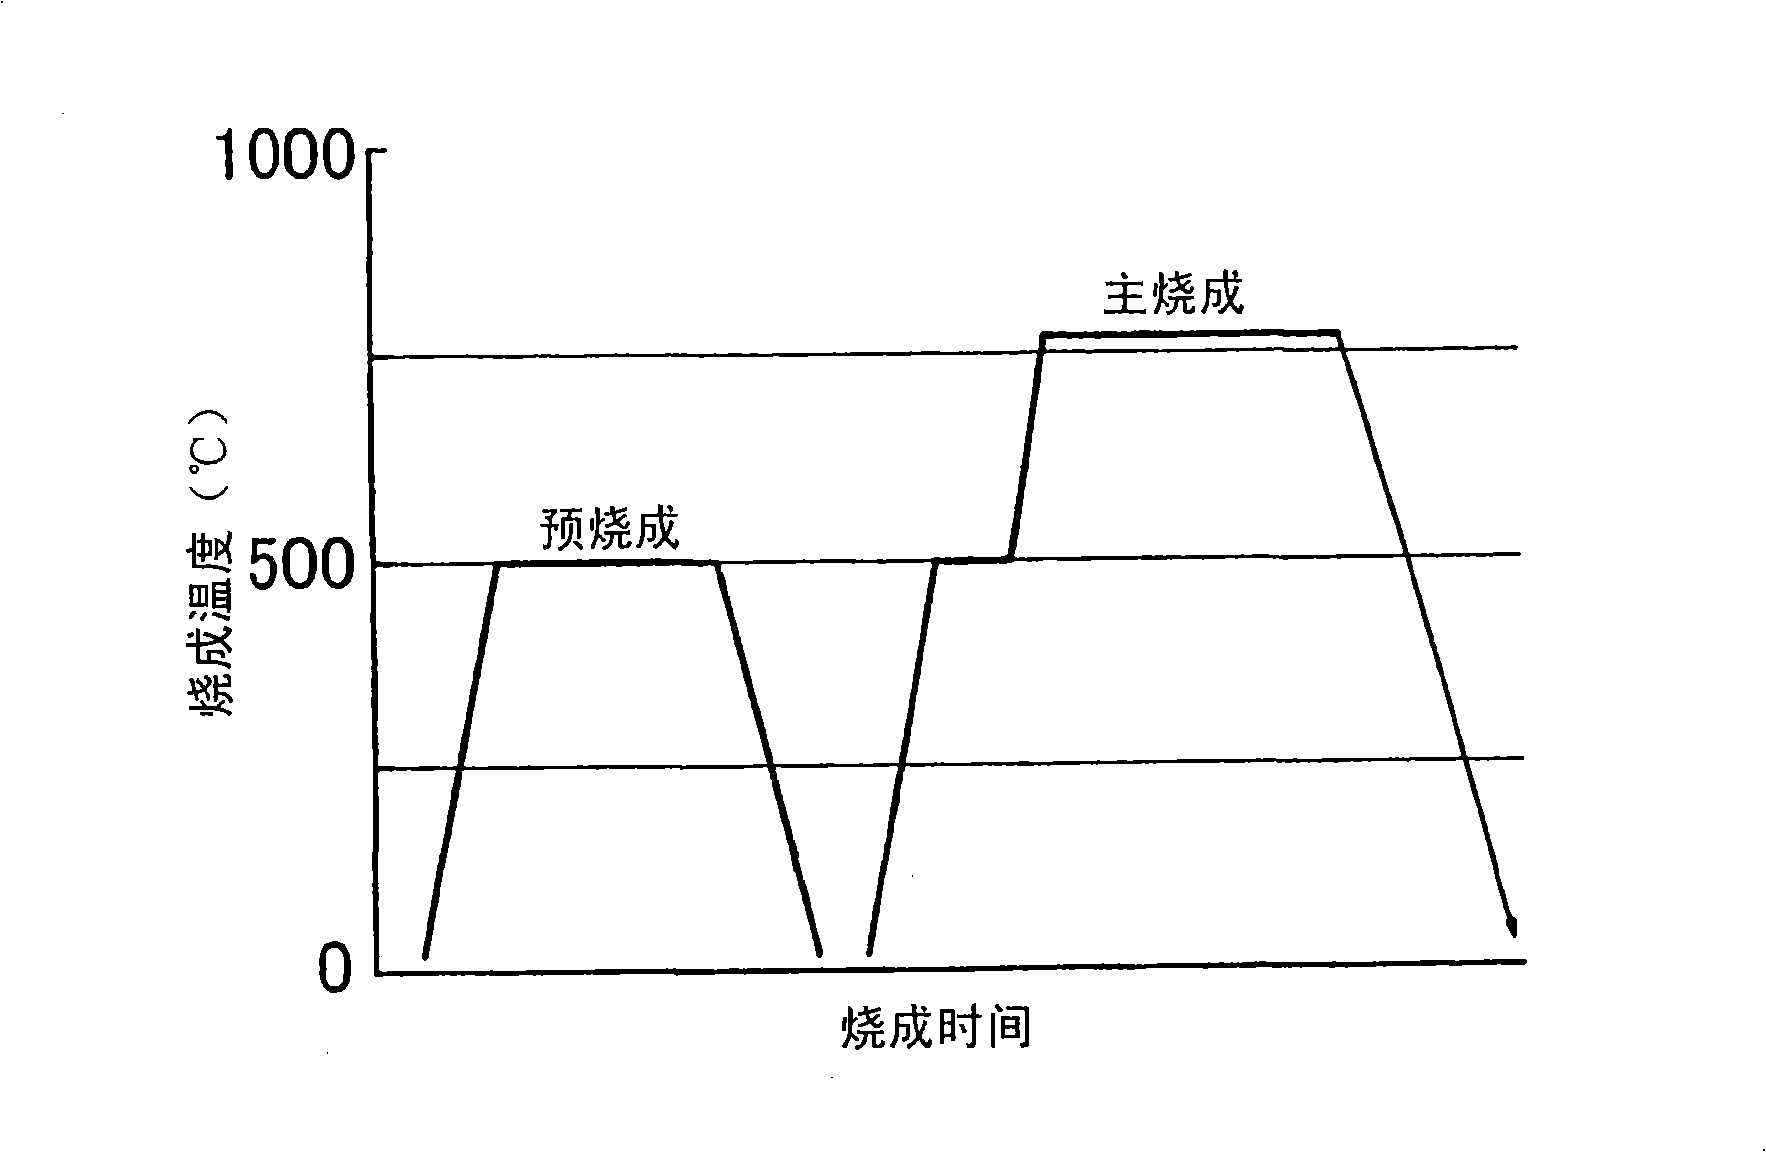 Process for producing superconducting oxide material